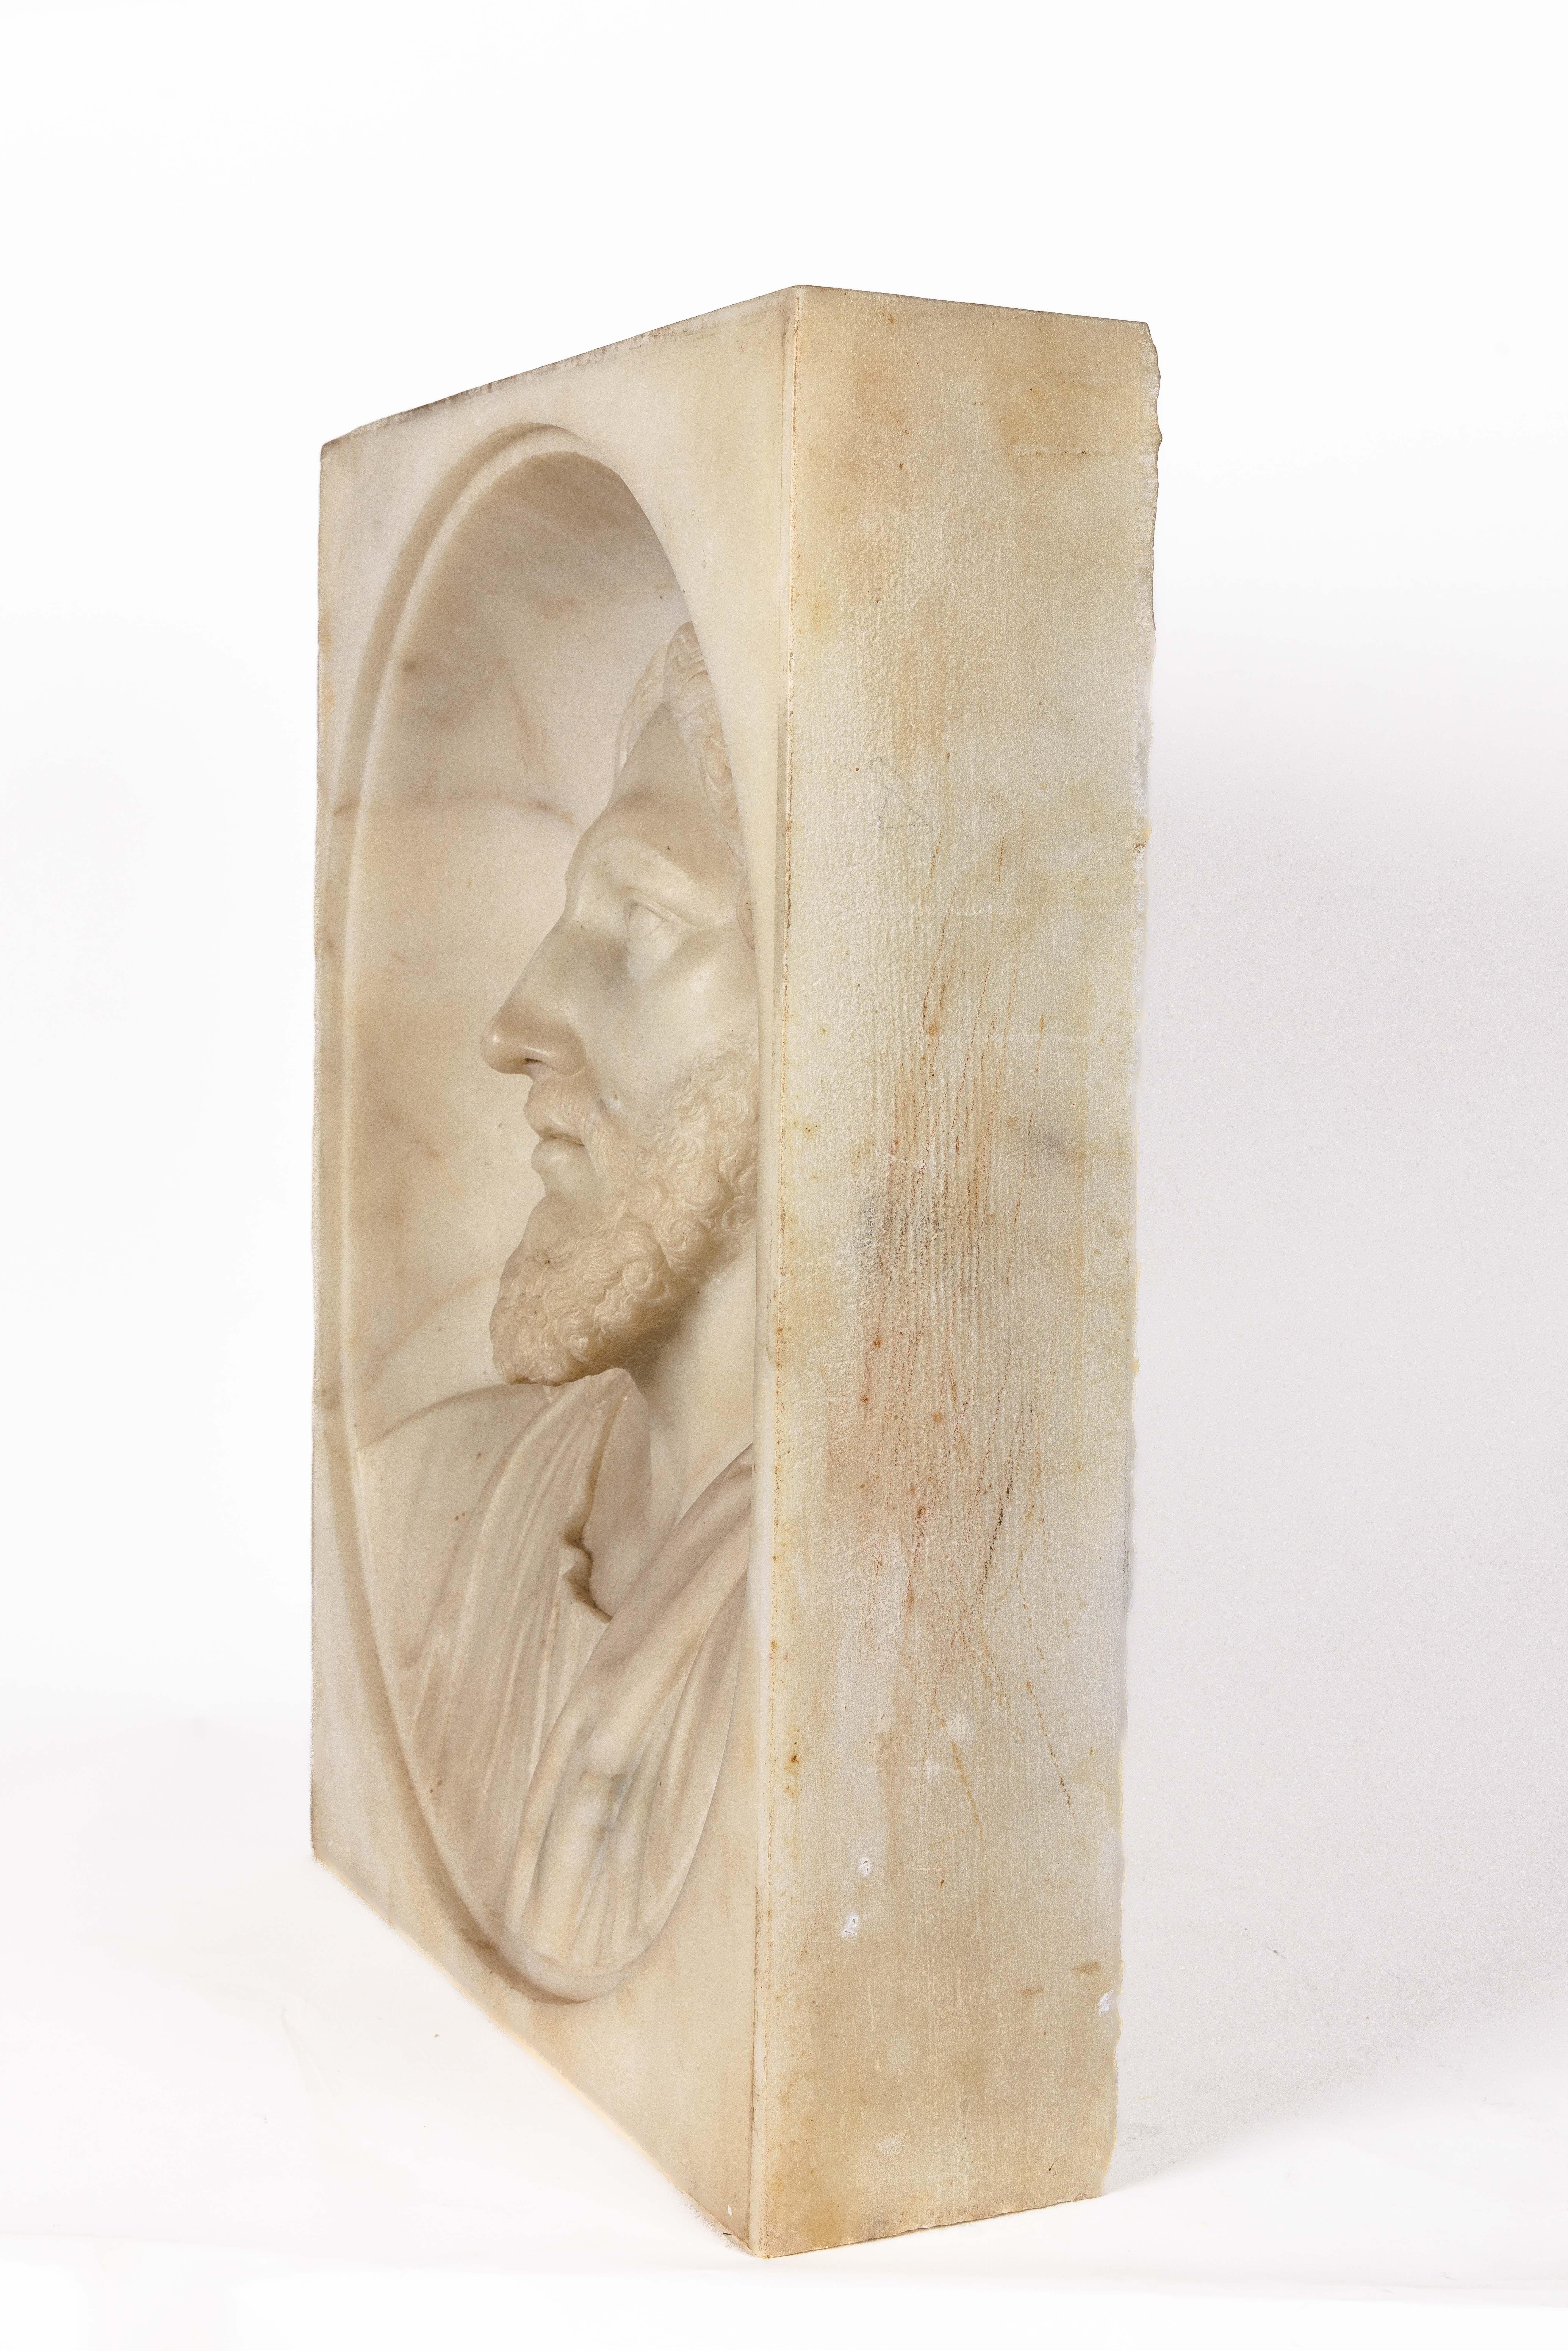 Rare and Important Italian White Marble Bust Sculpture of Jesus Christ, C. 1850 For Sale 3